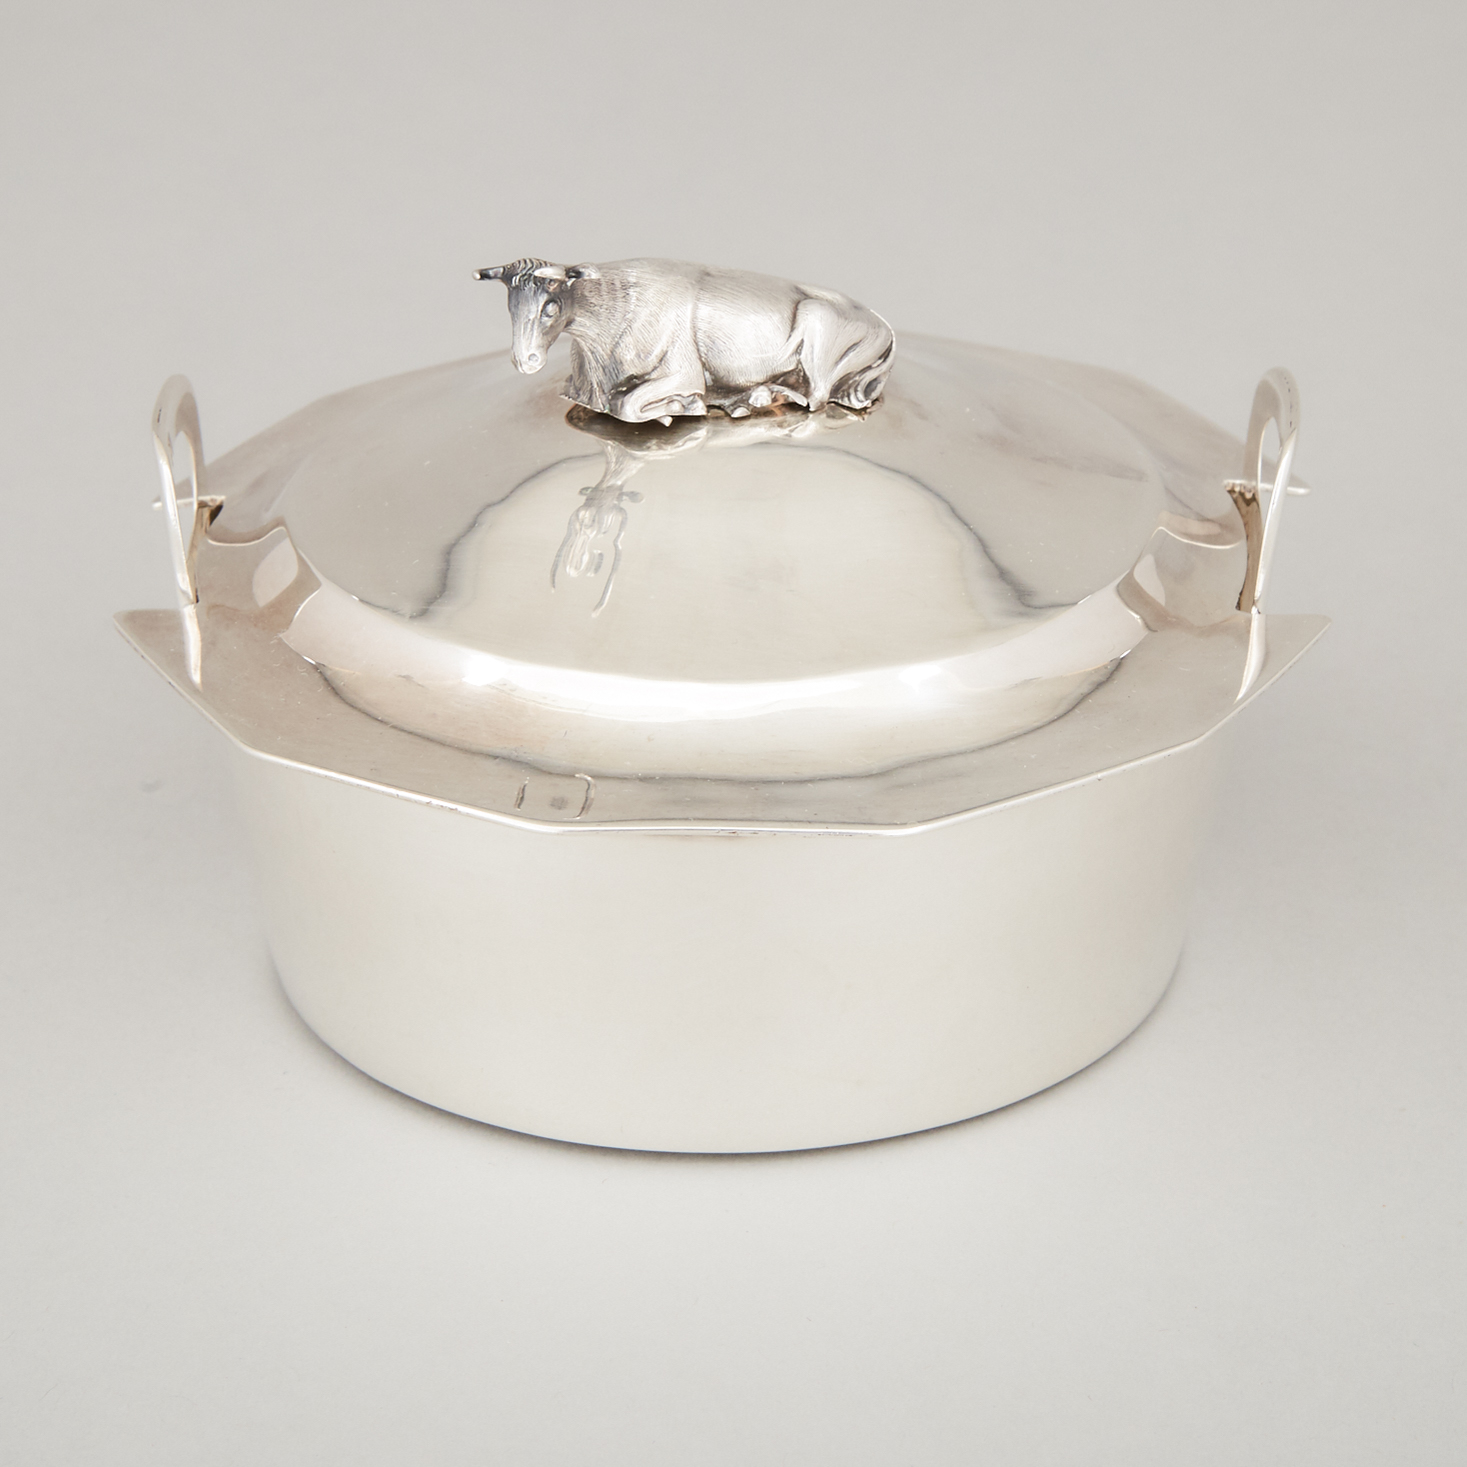 Victorian Silver Covered Butter Dish, c.1840 and later